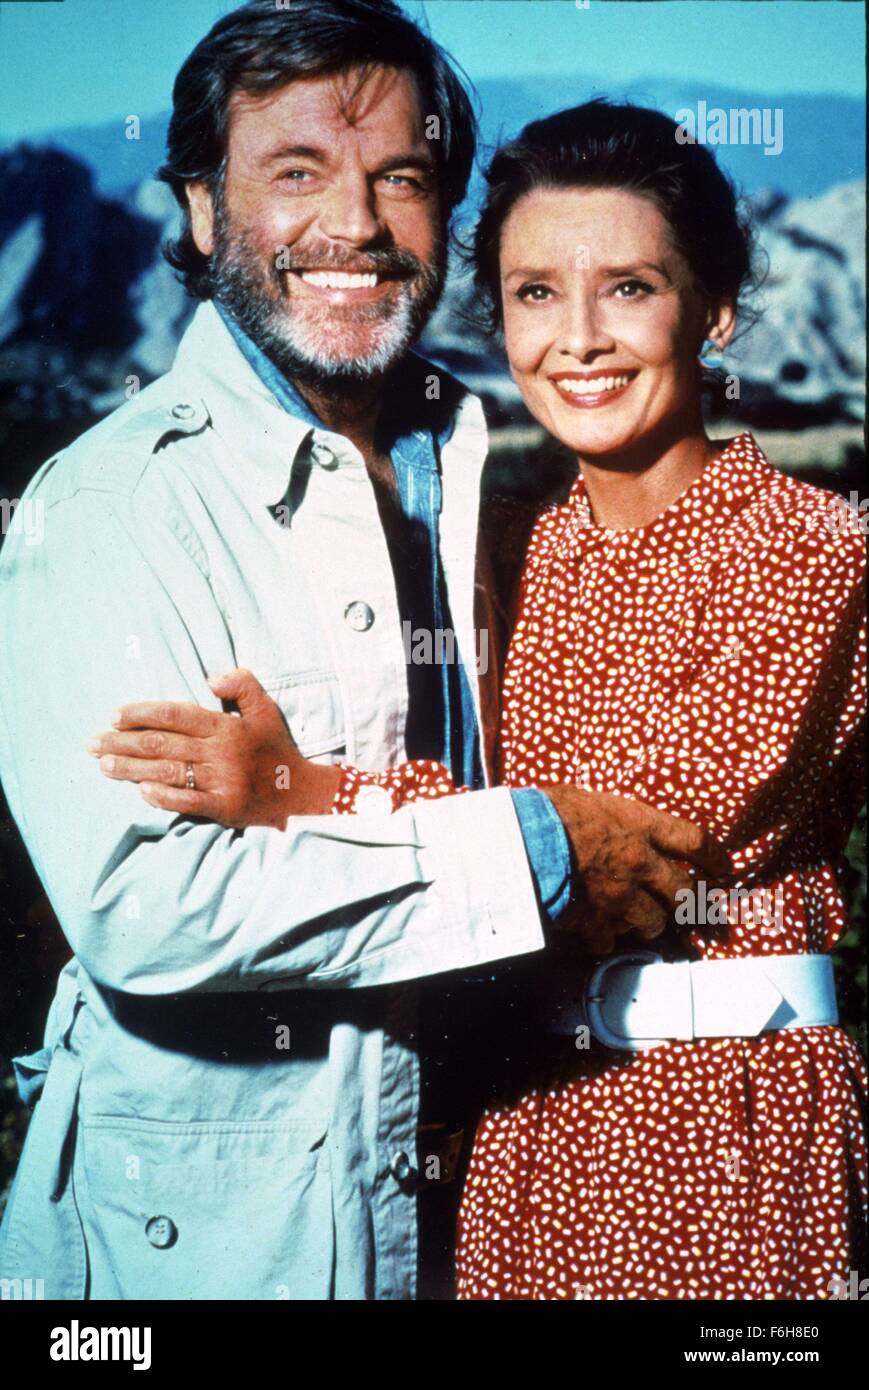 1987, Film Title: LOVE AMONG THIEVES, Director: ROGER YOUNG, Pictured: AUDREY HEPBURN, ROBERT WAGNER, EMBRACE, BEARD, PROUD, SMILING, HOPEFUL, LOOKING TO FUTURE. (Credit Image: SNAP) Stock Photo